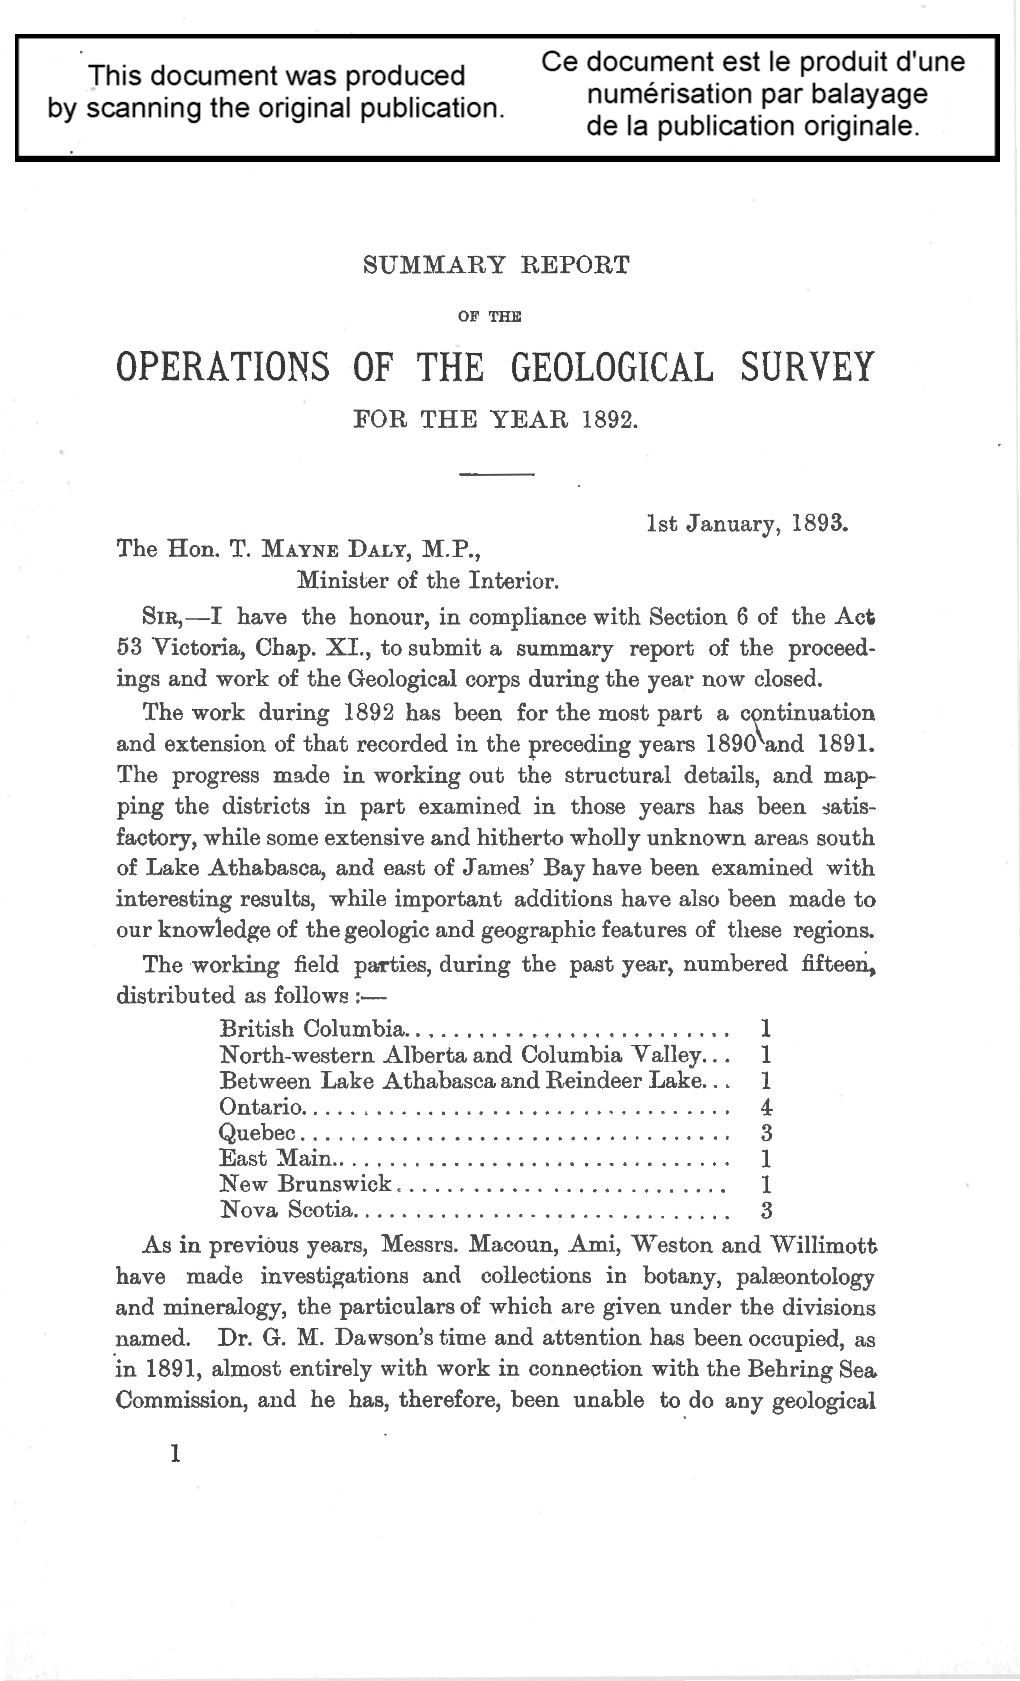 Operations of the Geological Survey Fob